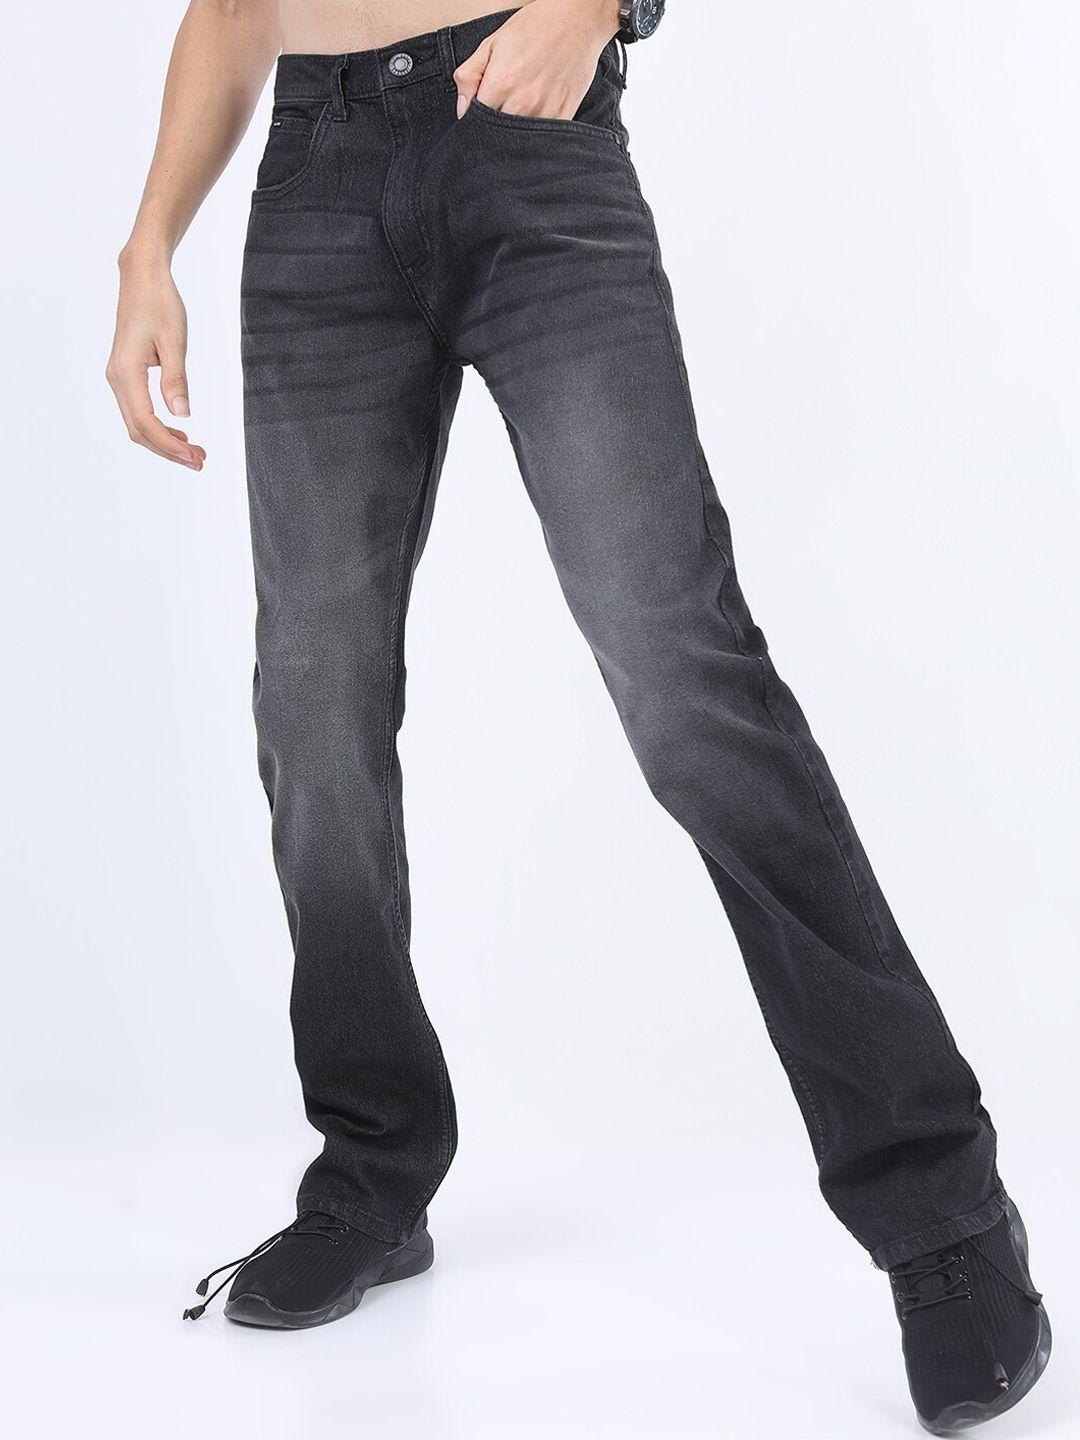 highlander-men-charcoal-bootcut-clean-look-light-fade-stretchable-jeans